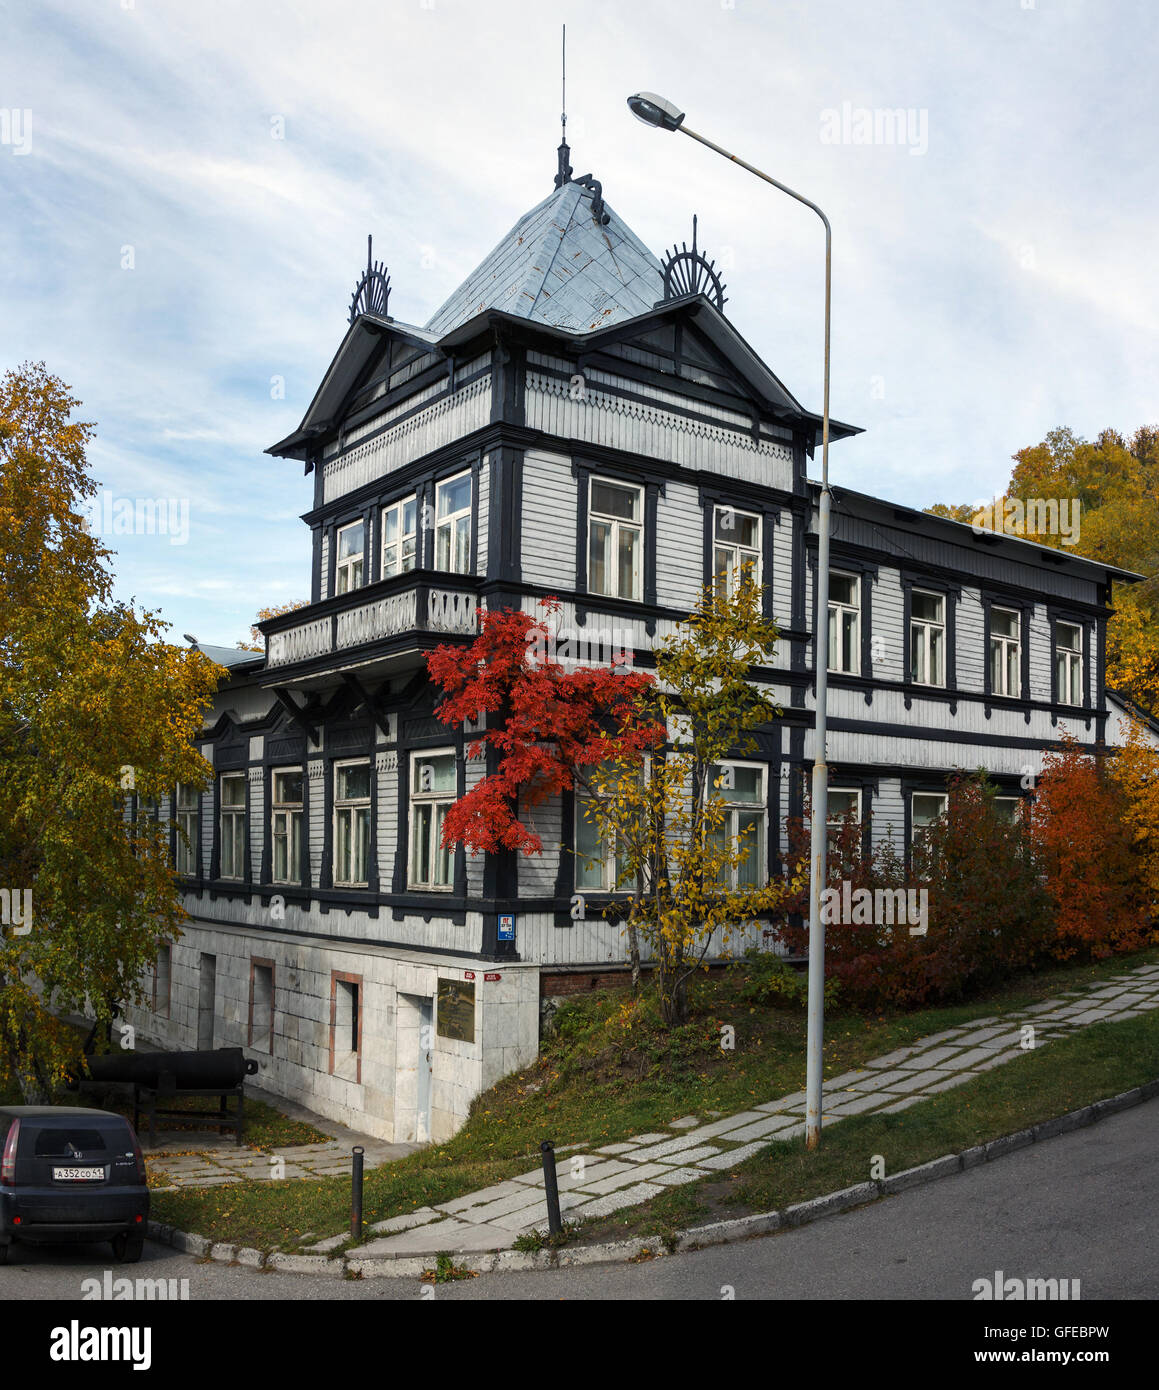 Old wooden building of the Kamchatka regional unified museum in the Petropavlovsk-Kamchatsky City. Stock Photo